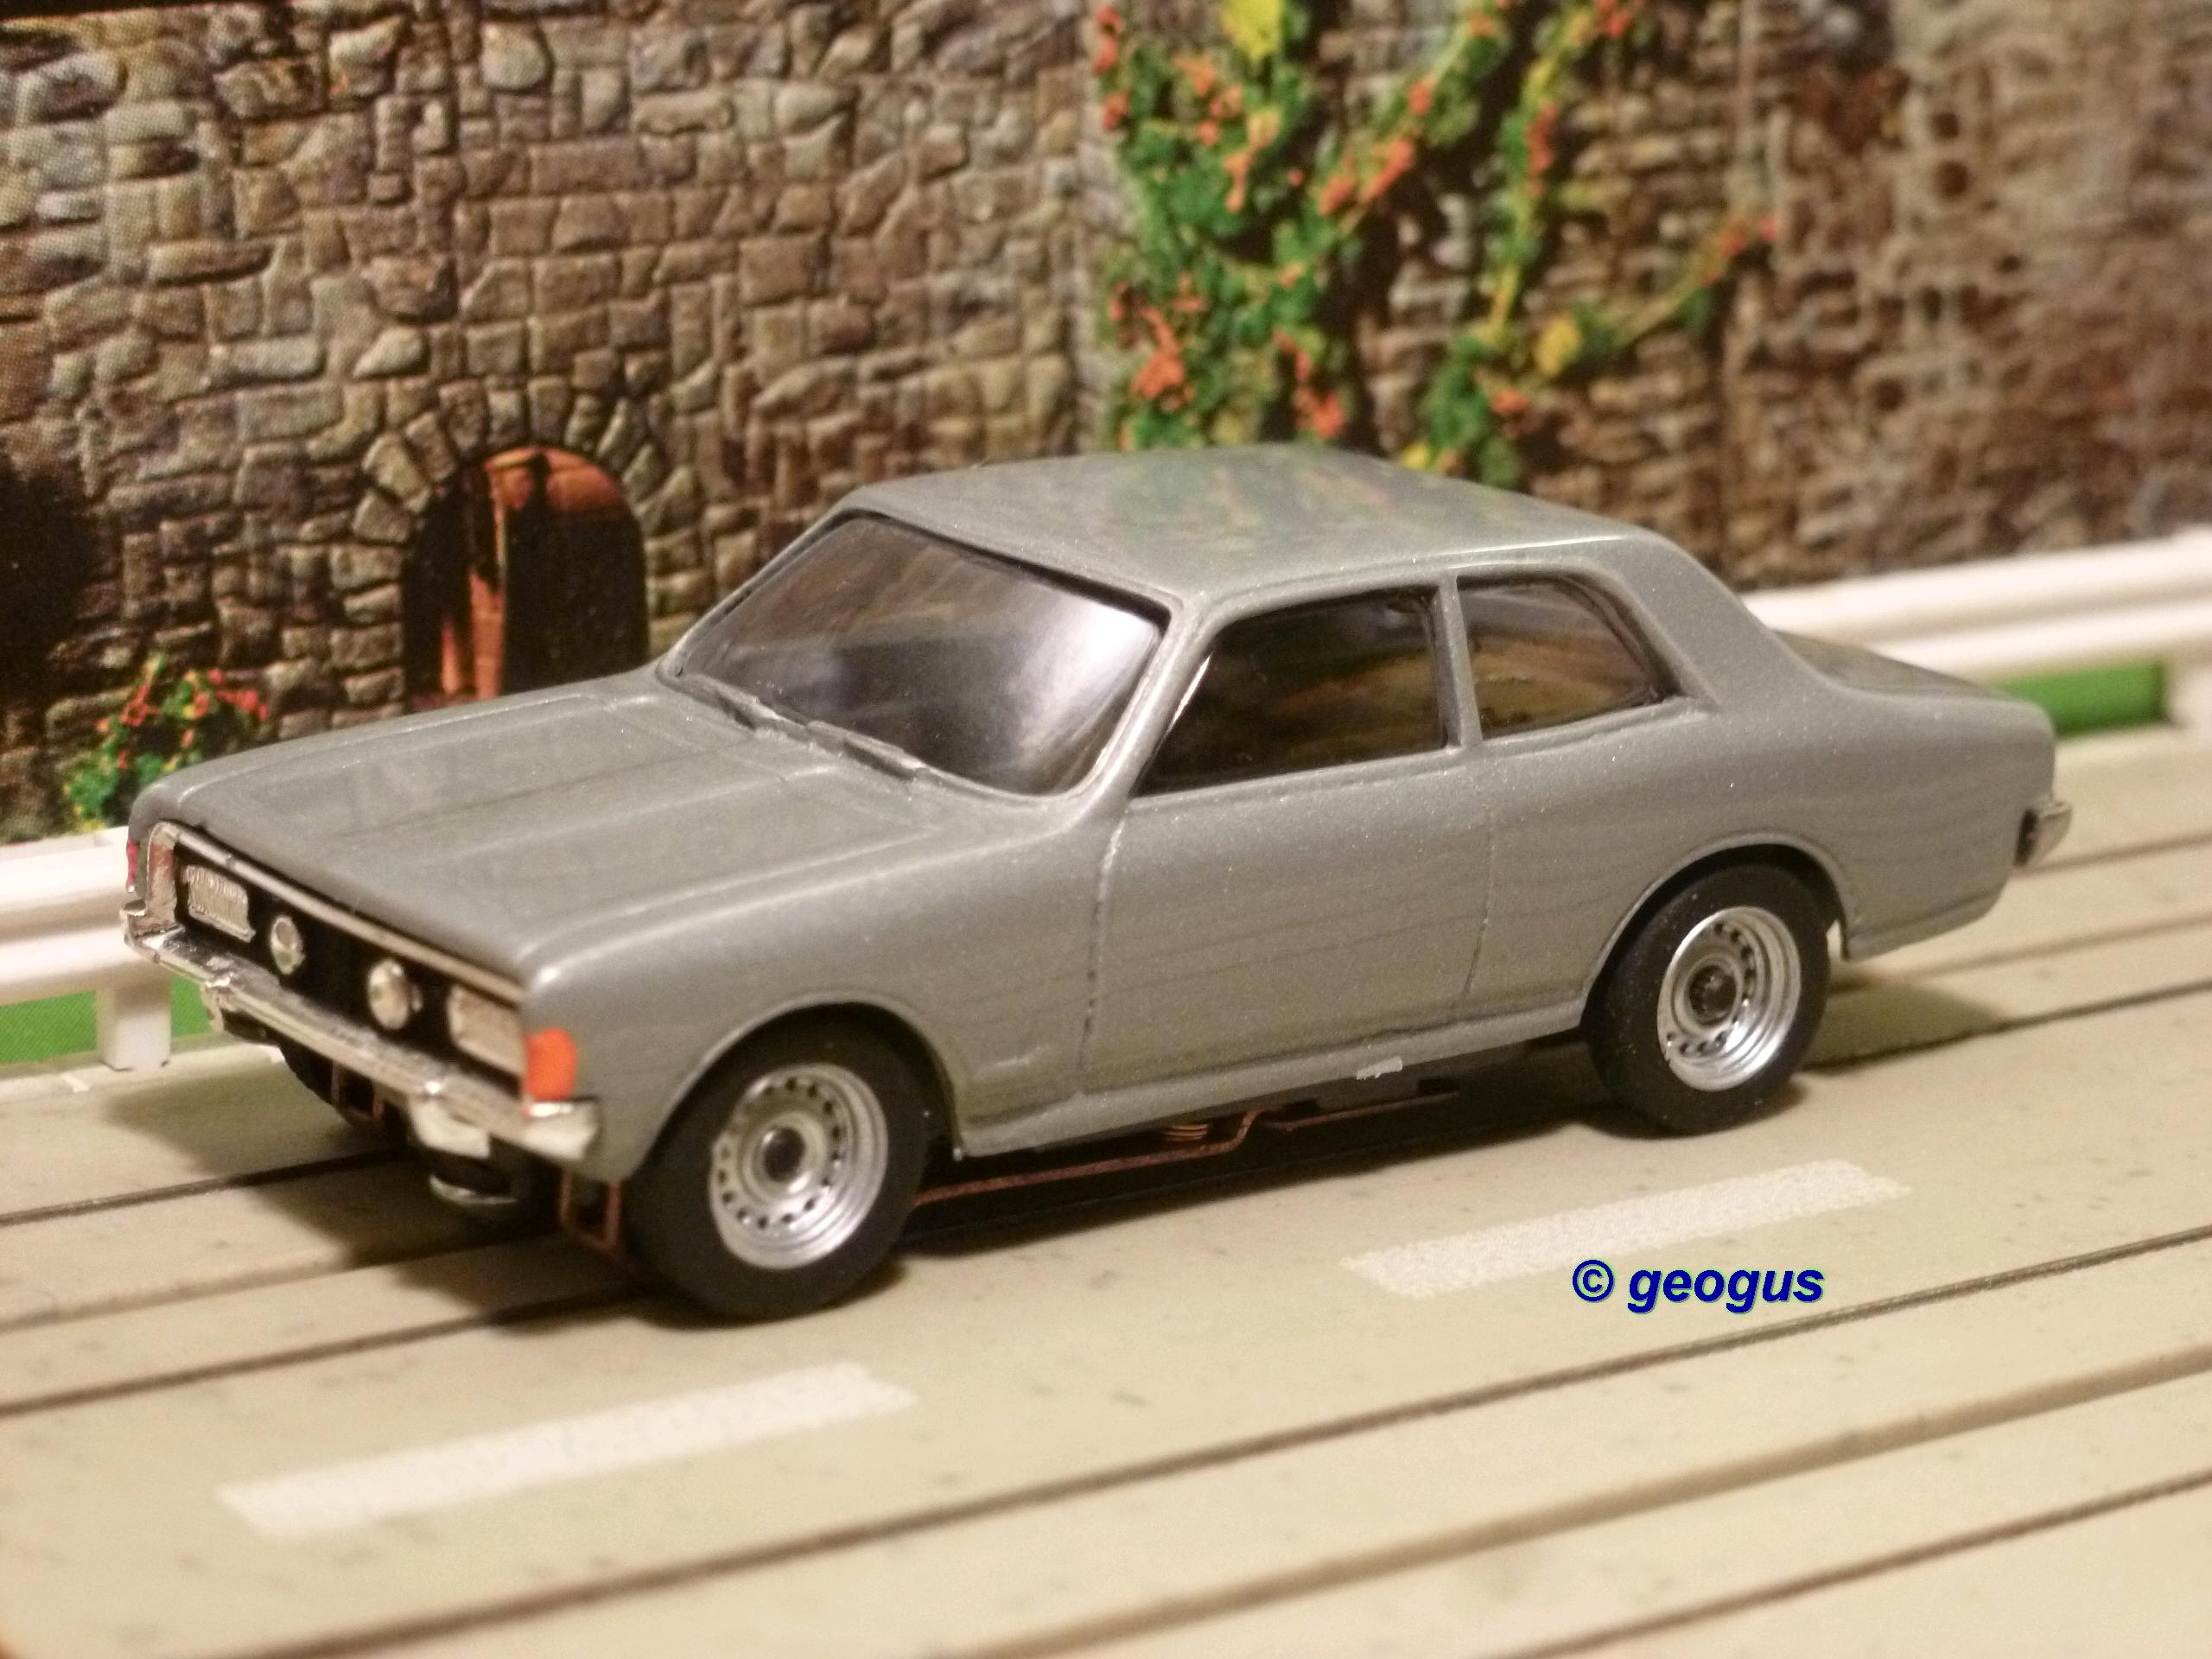 The World of Geogus : H0 Slotcars - Slotcar Gallery - Bauer